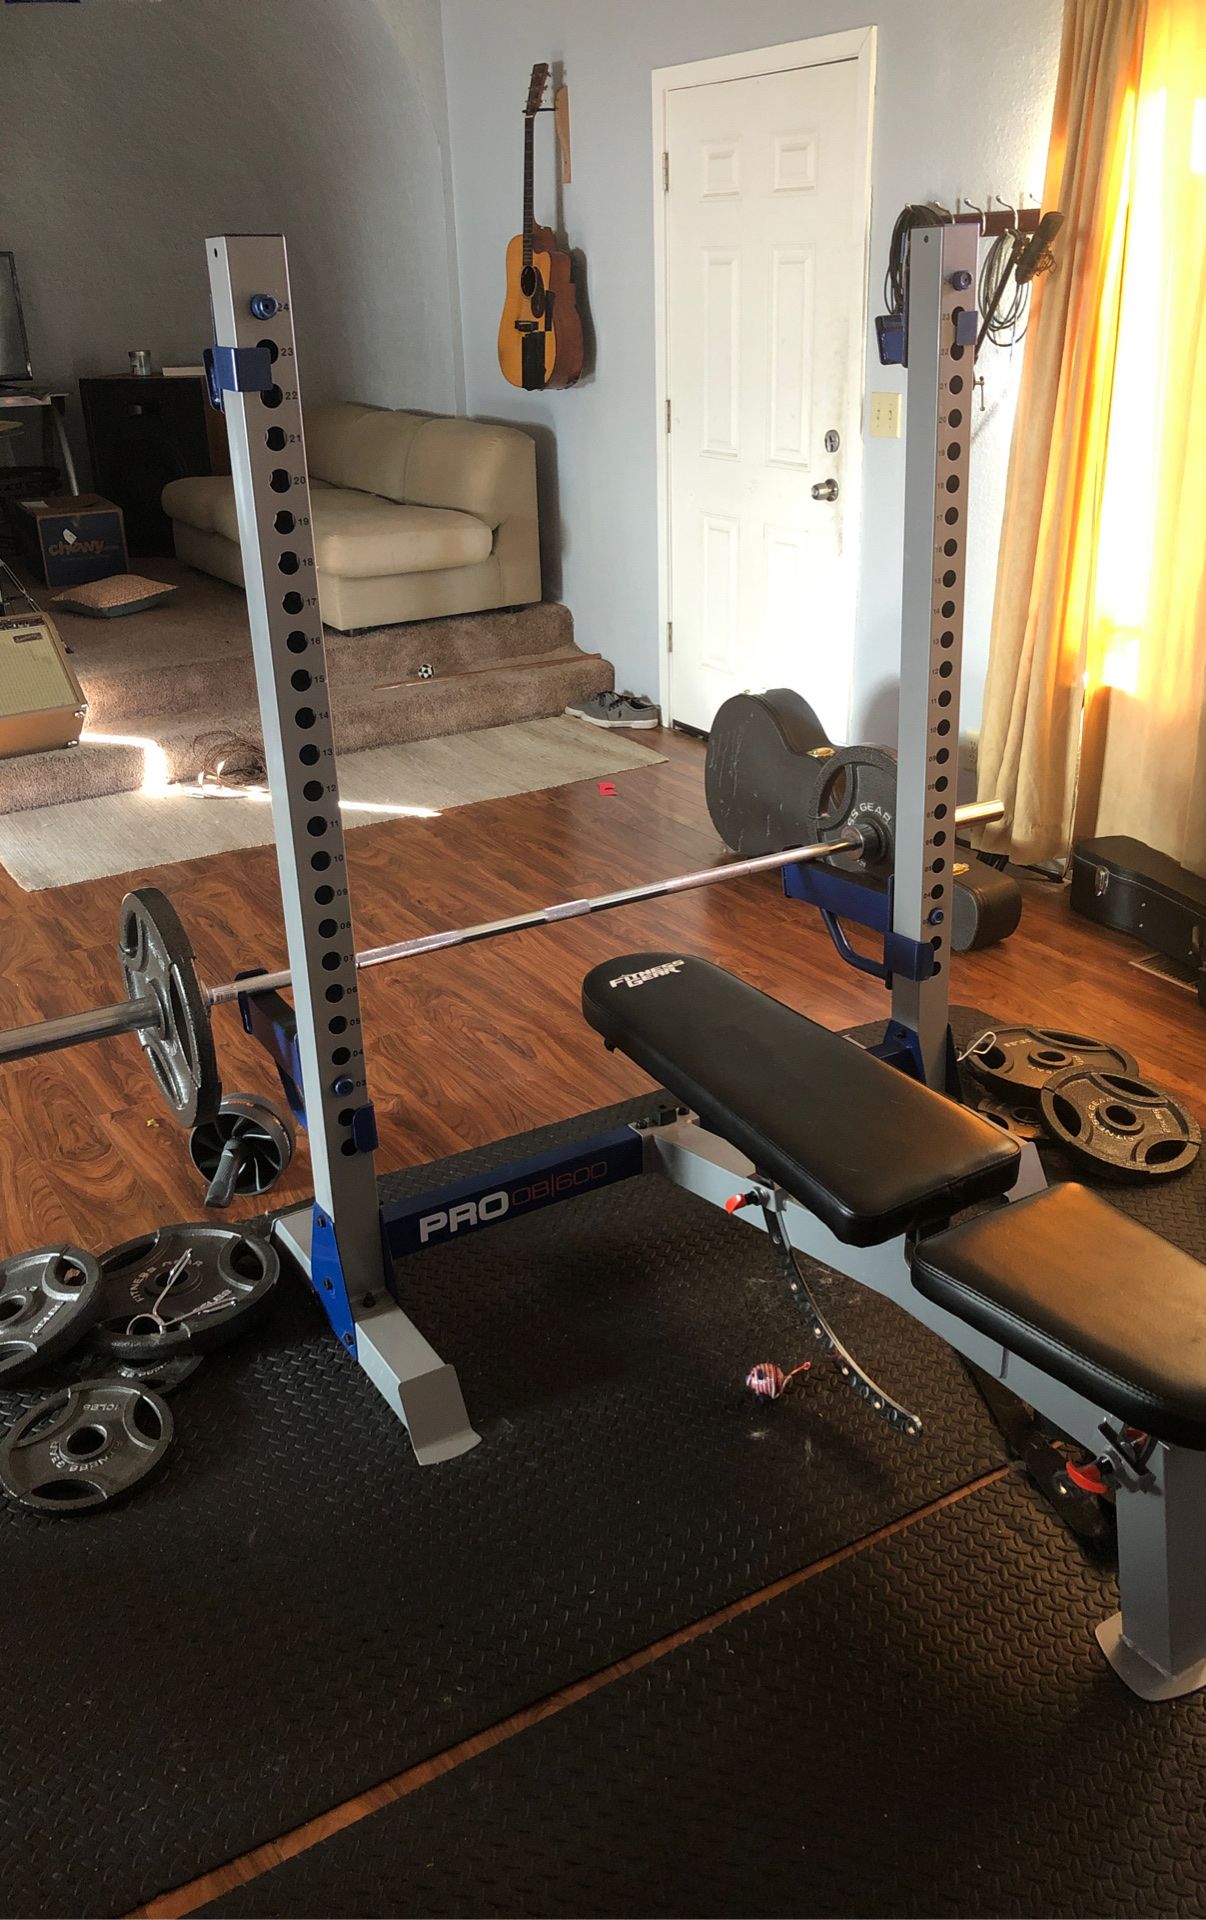 Fitness Gear Bench, Barbell, and weights